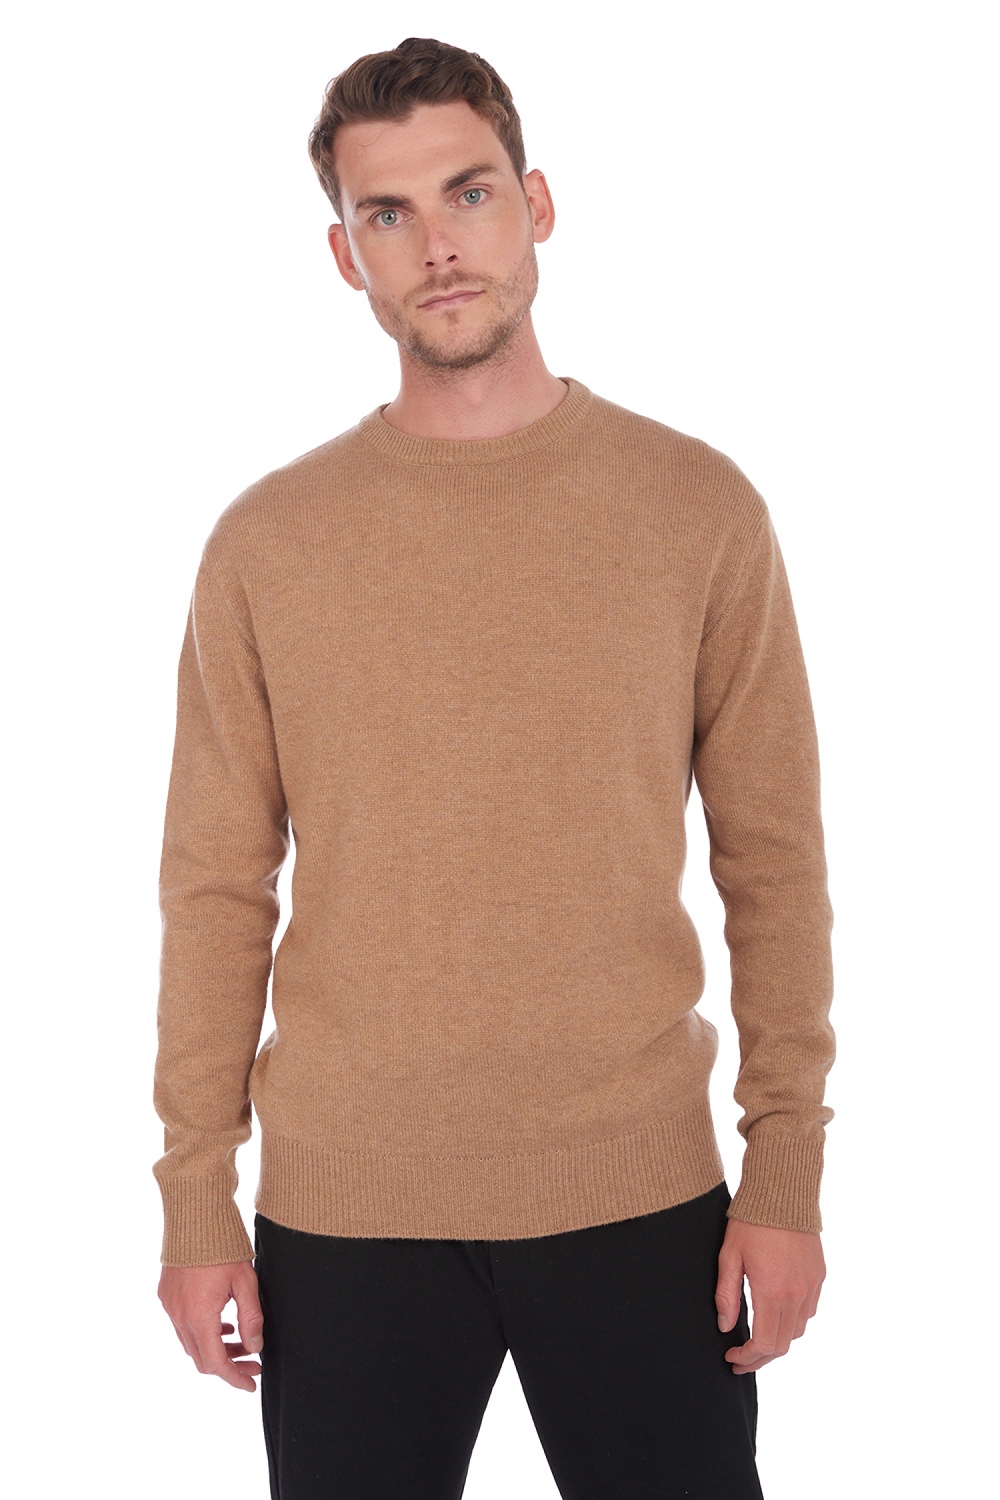 Cachemire pull homme col rond nestor 4f camel chine xs